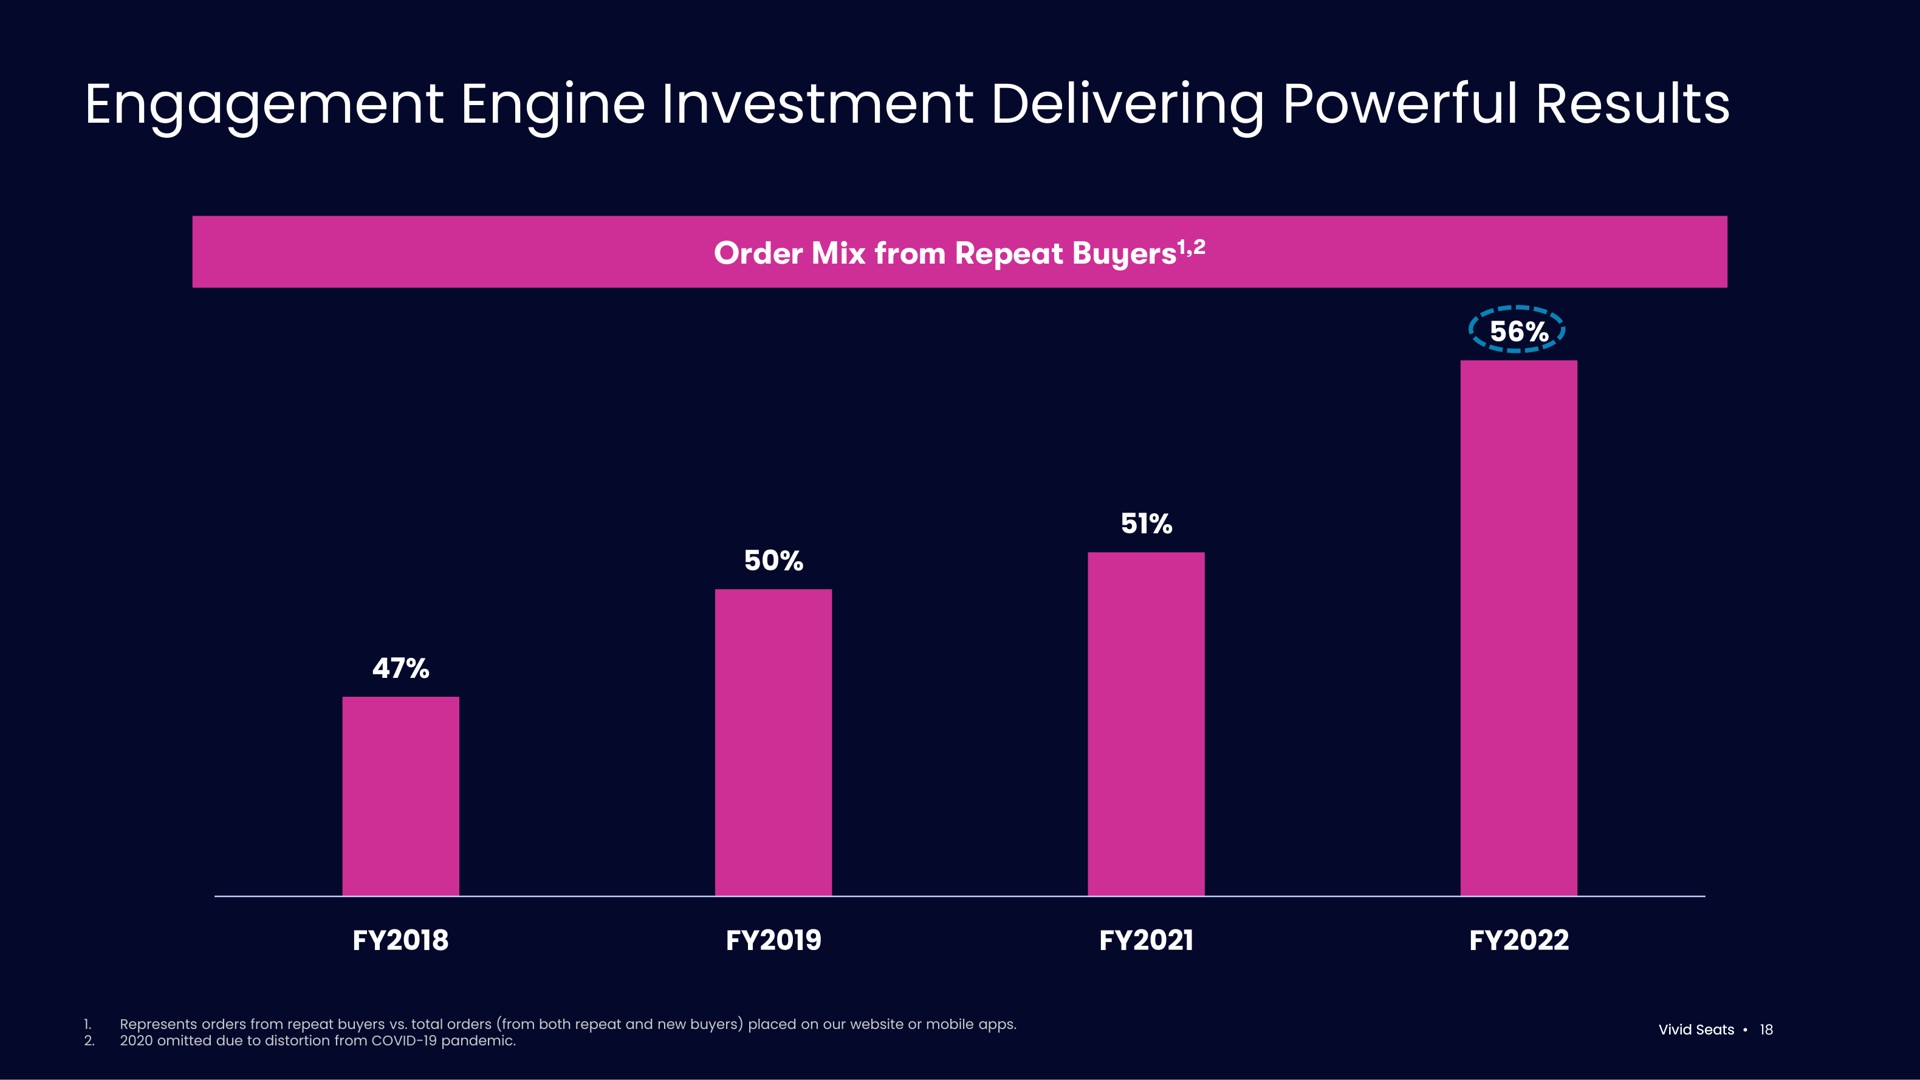 engagement engine investment delivering powerful results | Vivid Seats